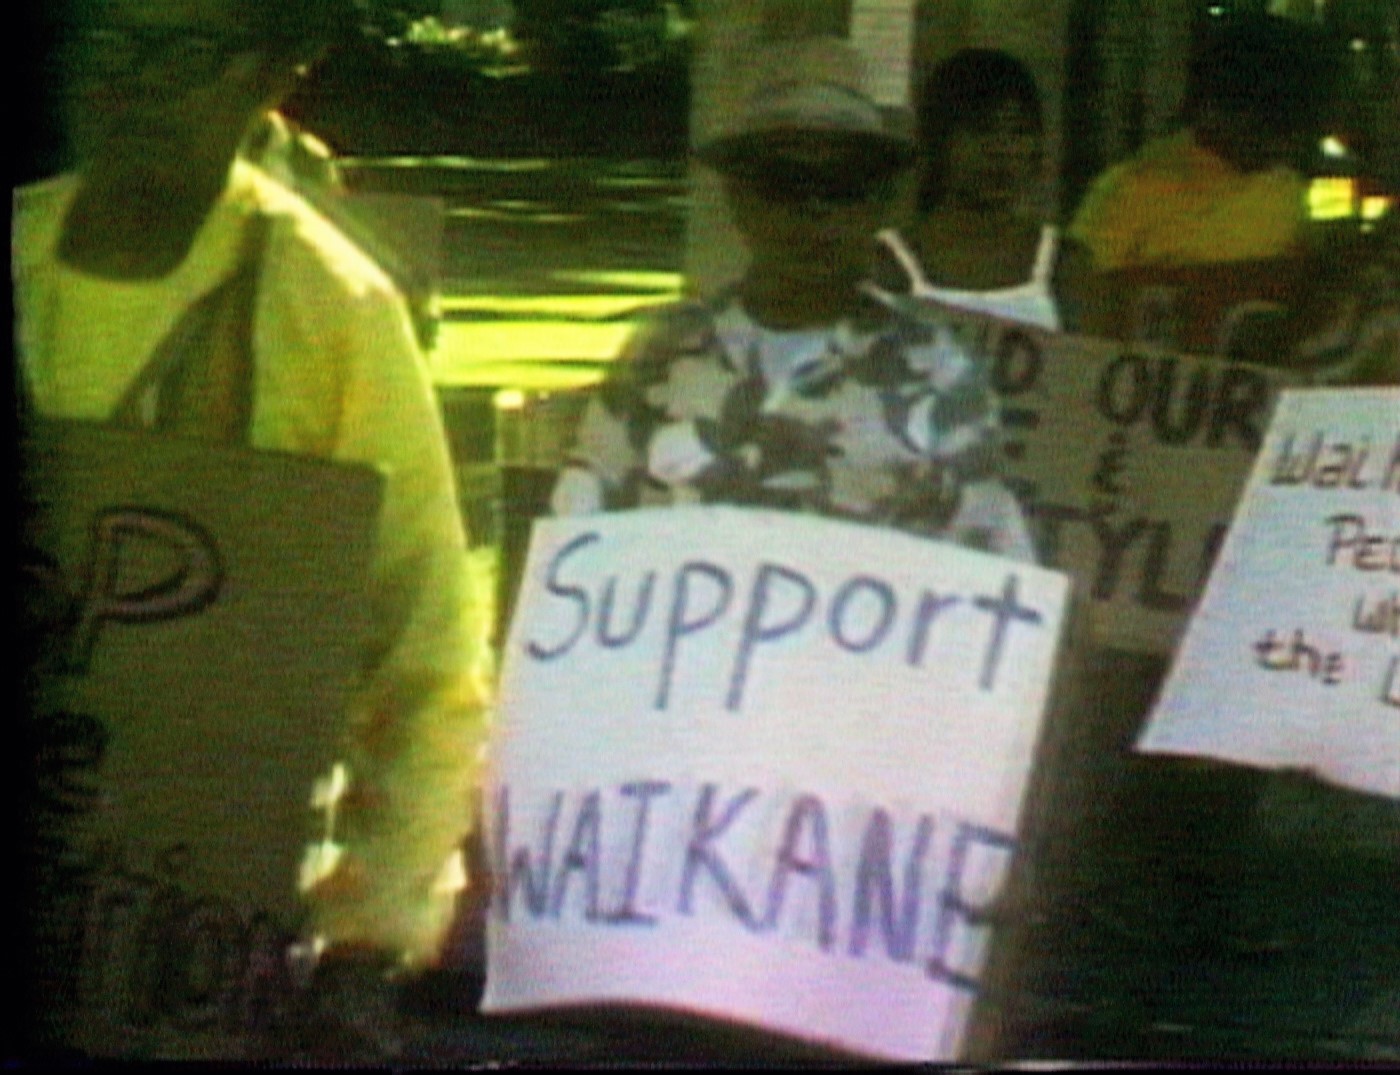 Video frame grab of protester carrying sign saying Support Waikane